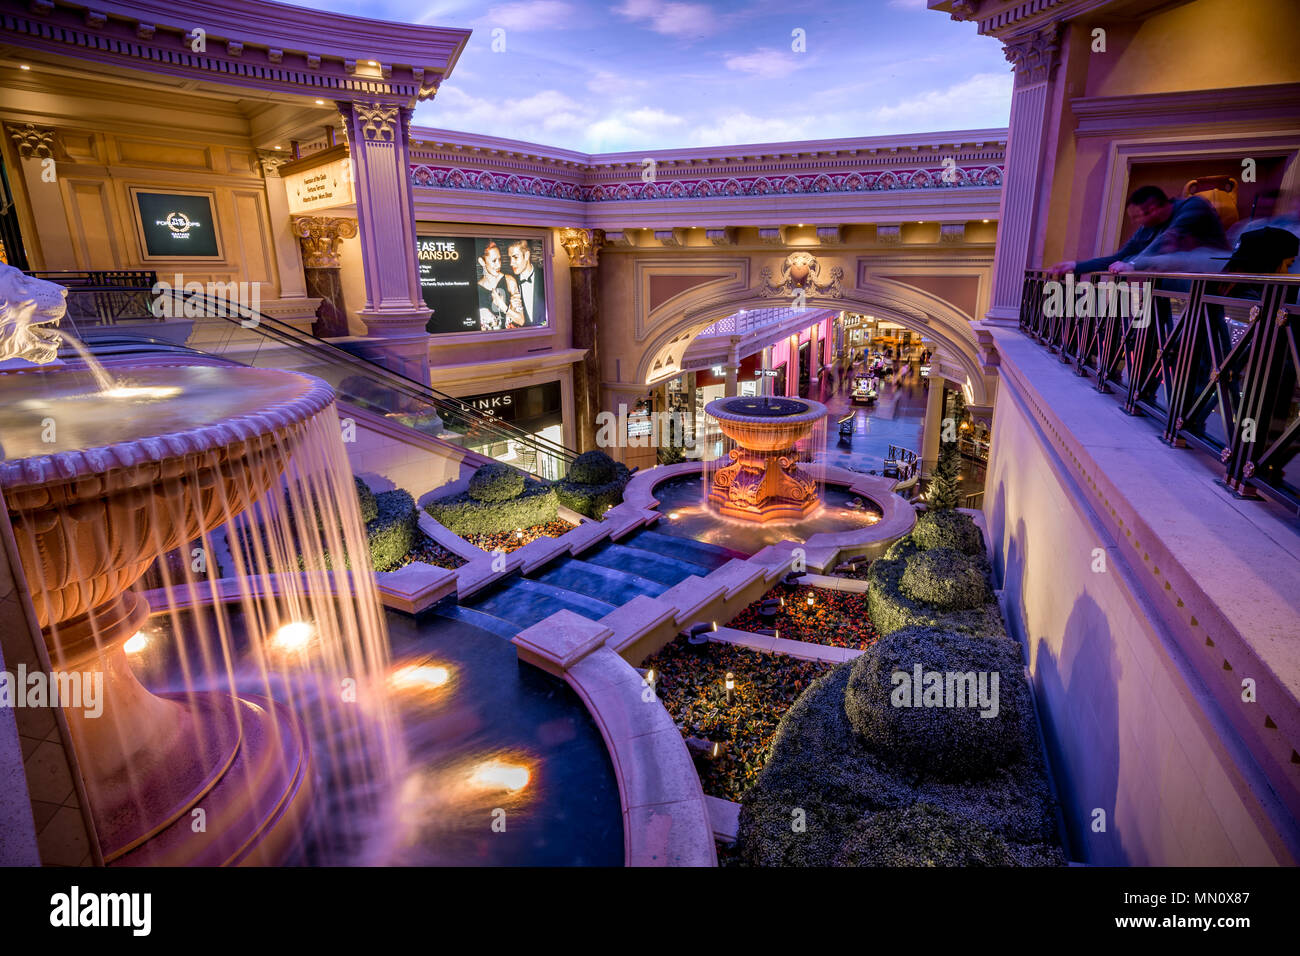 Las Vegas, US - April 28, 2018: The interior of the famous Forum shops in Ceasars palace hotel in Las Vegas Stock Photo